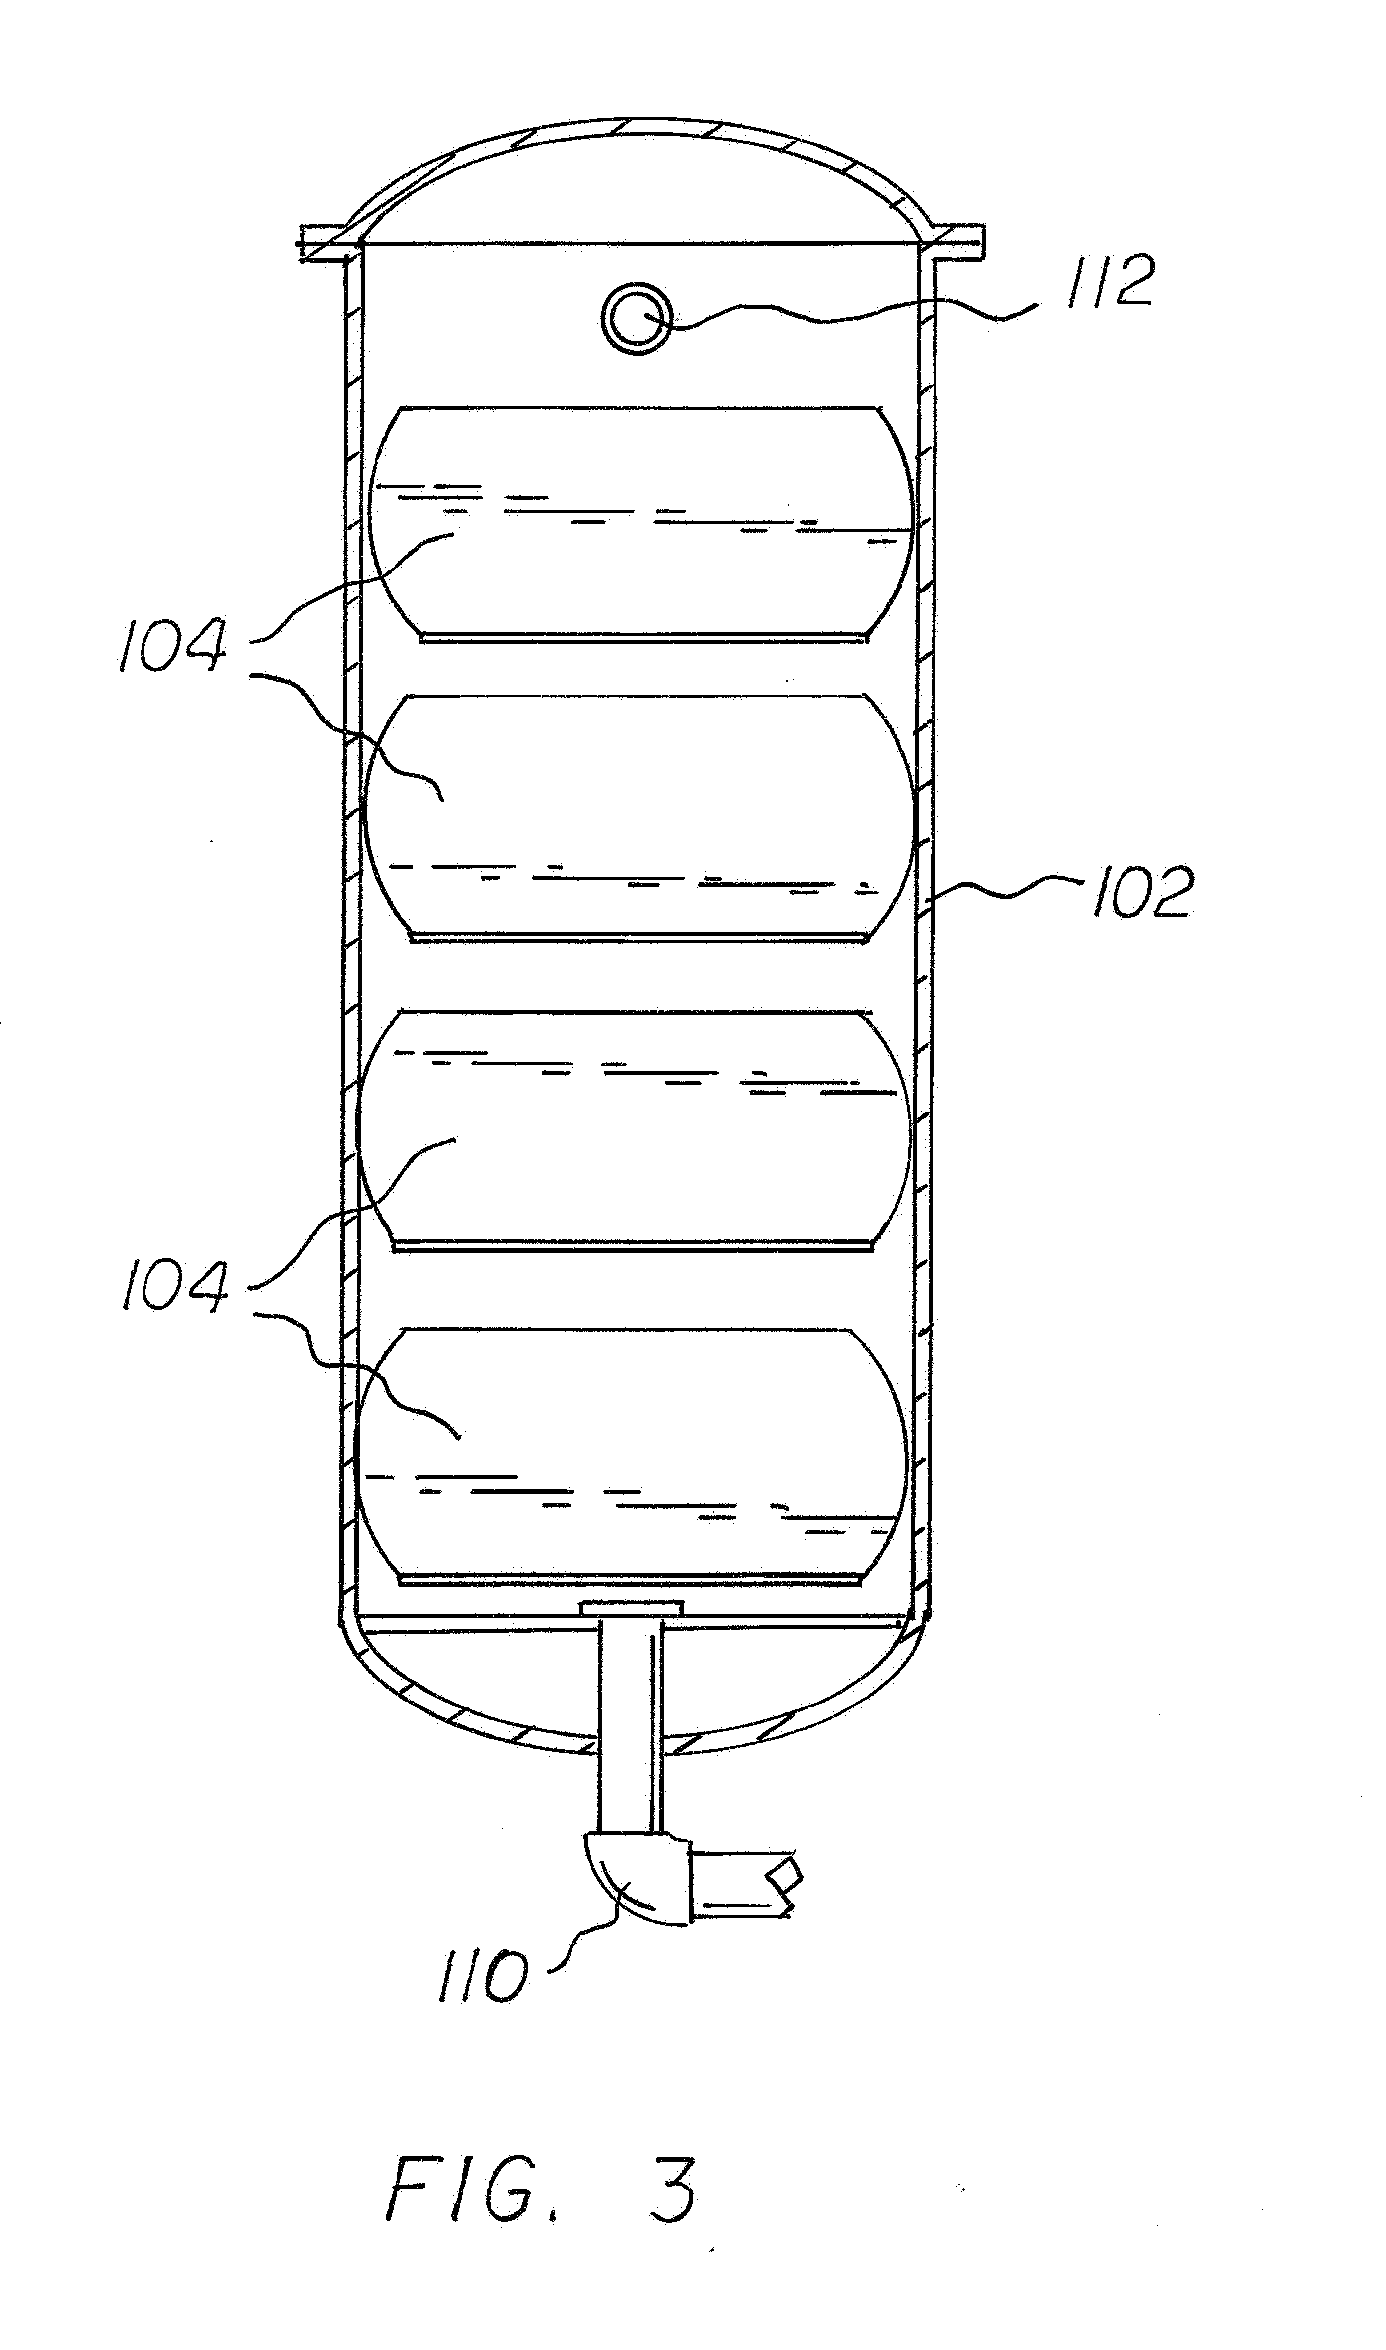 Method and system to separate solids from liquids